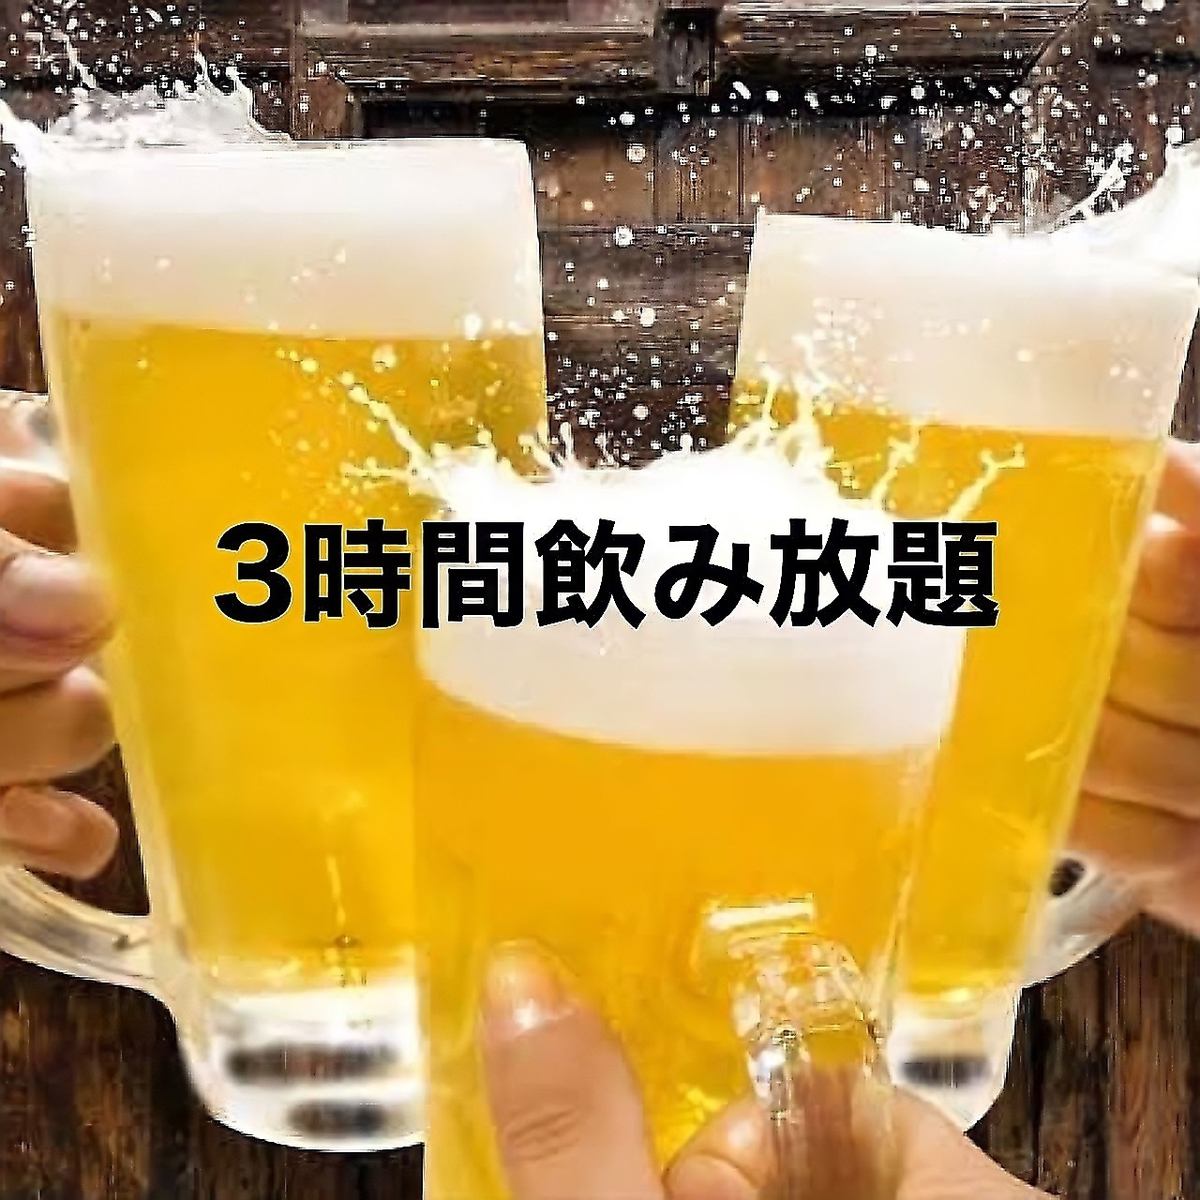 Draft beer is also OK★Great value all-you-can-drink single item★2 hours 777 yen/3 hours 999 yen!!